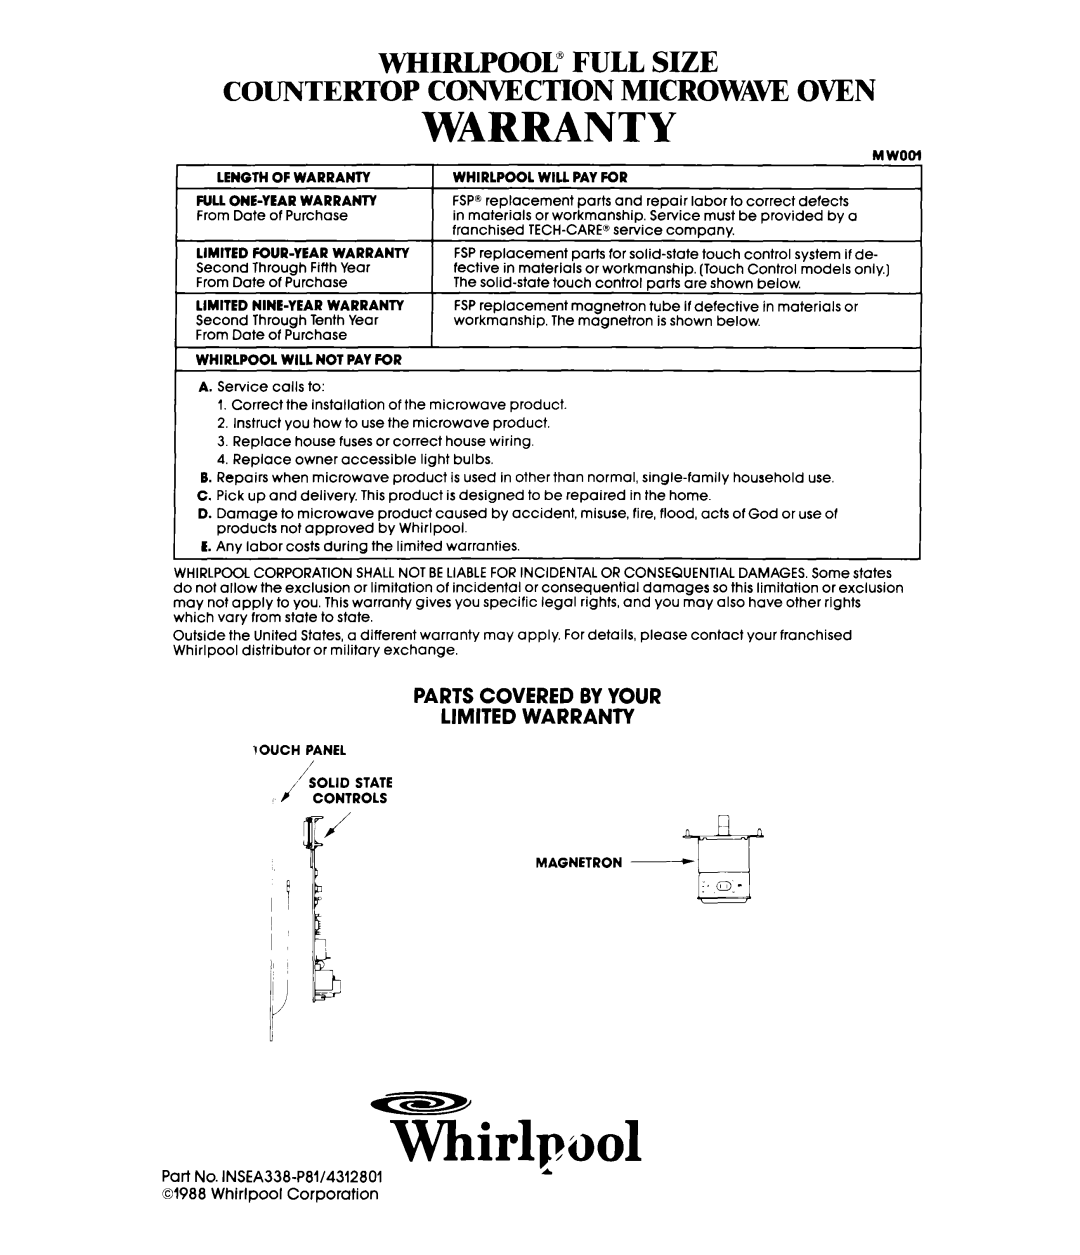 Whirlpool MC8991XT manual Whirlpool@ Full Size, Countertop Convection Microwaw Oven, Parts Covered By Your Limited Warranty 